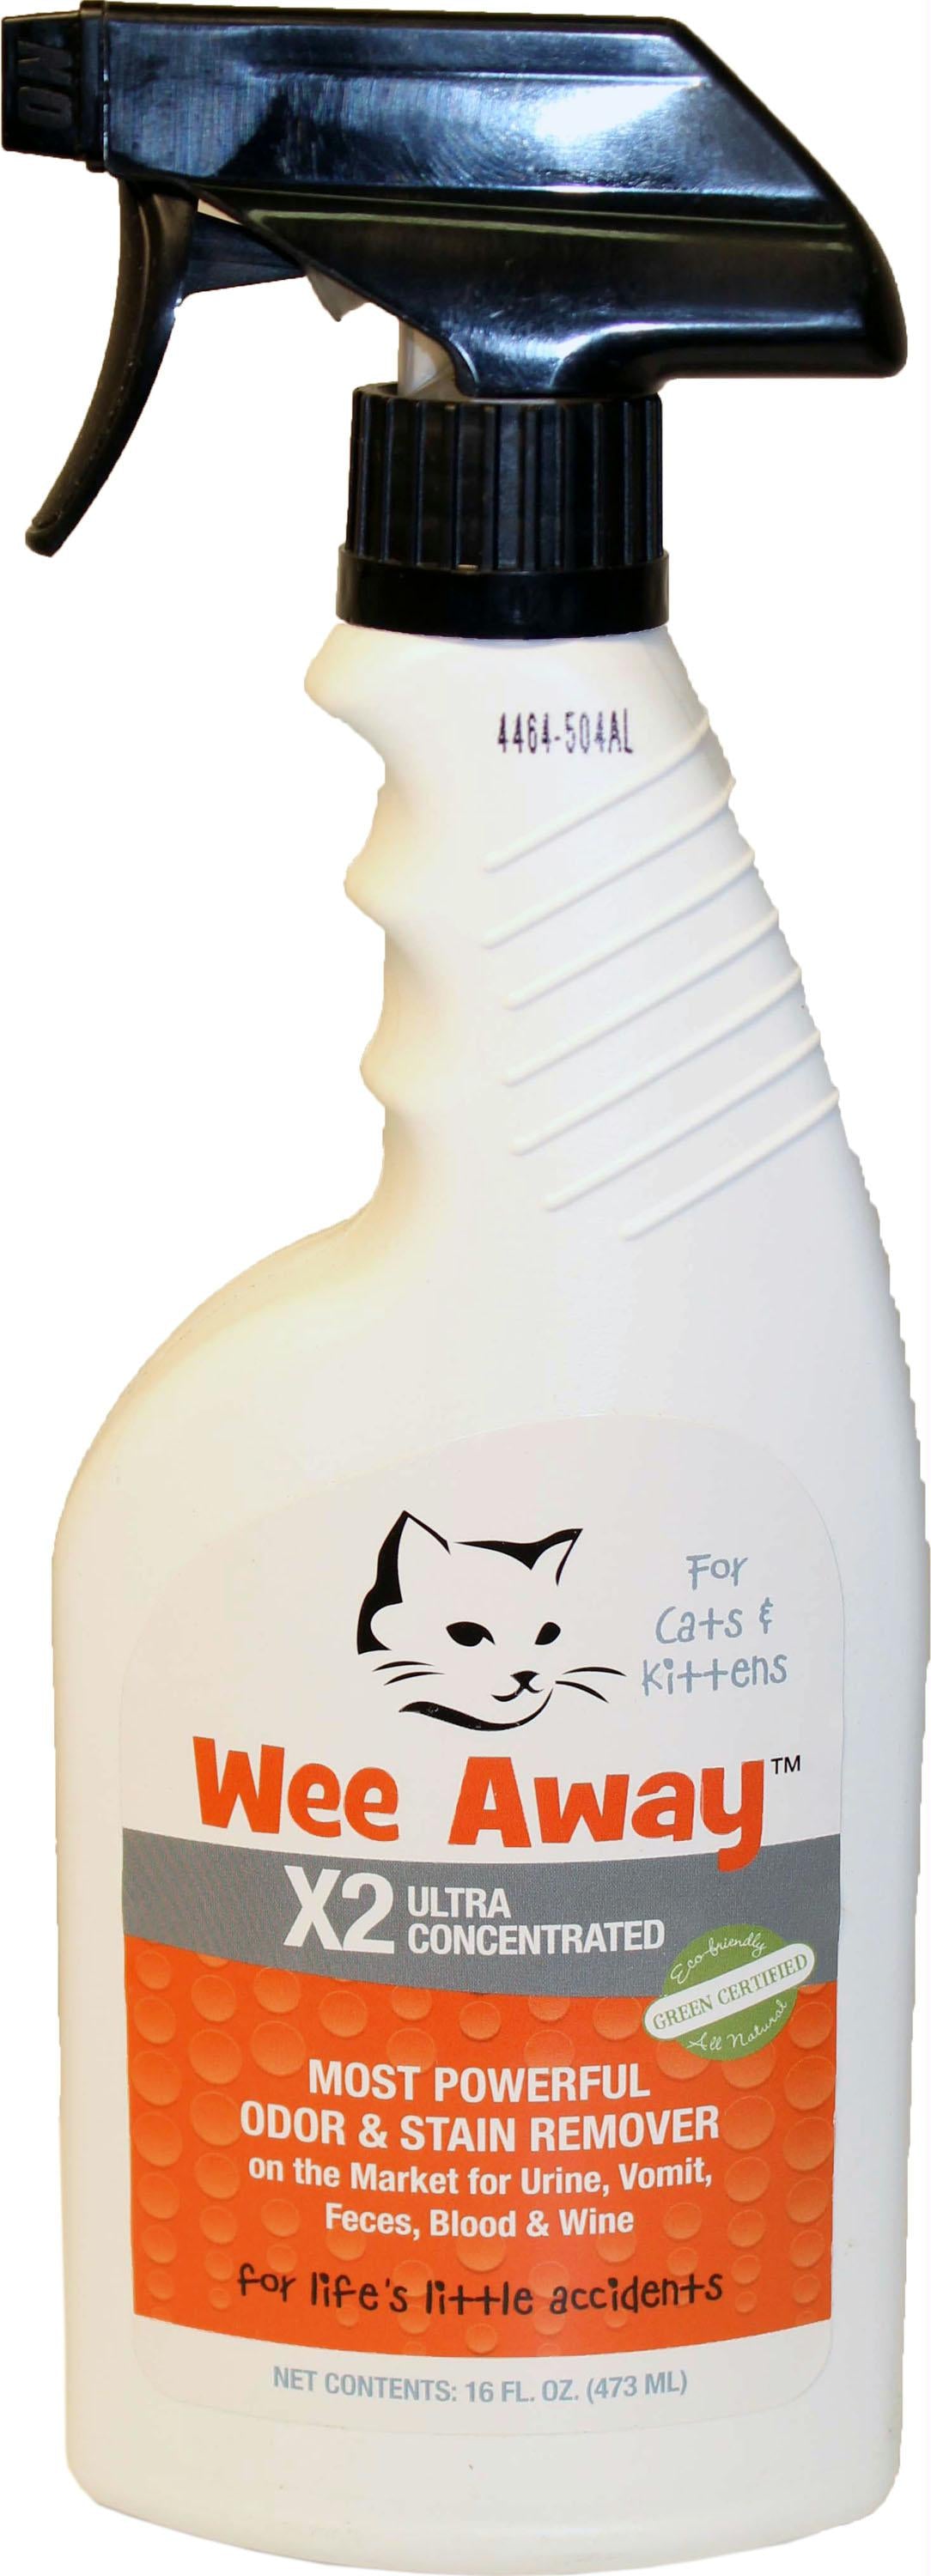 X2 Ultra Concentrated Cat Stain & Odor Remover - aomega-products